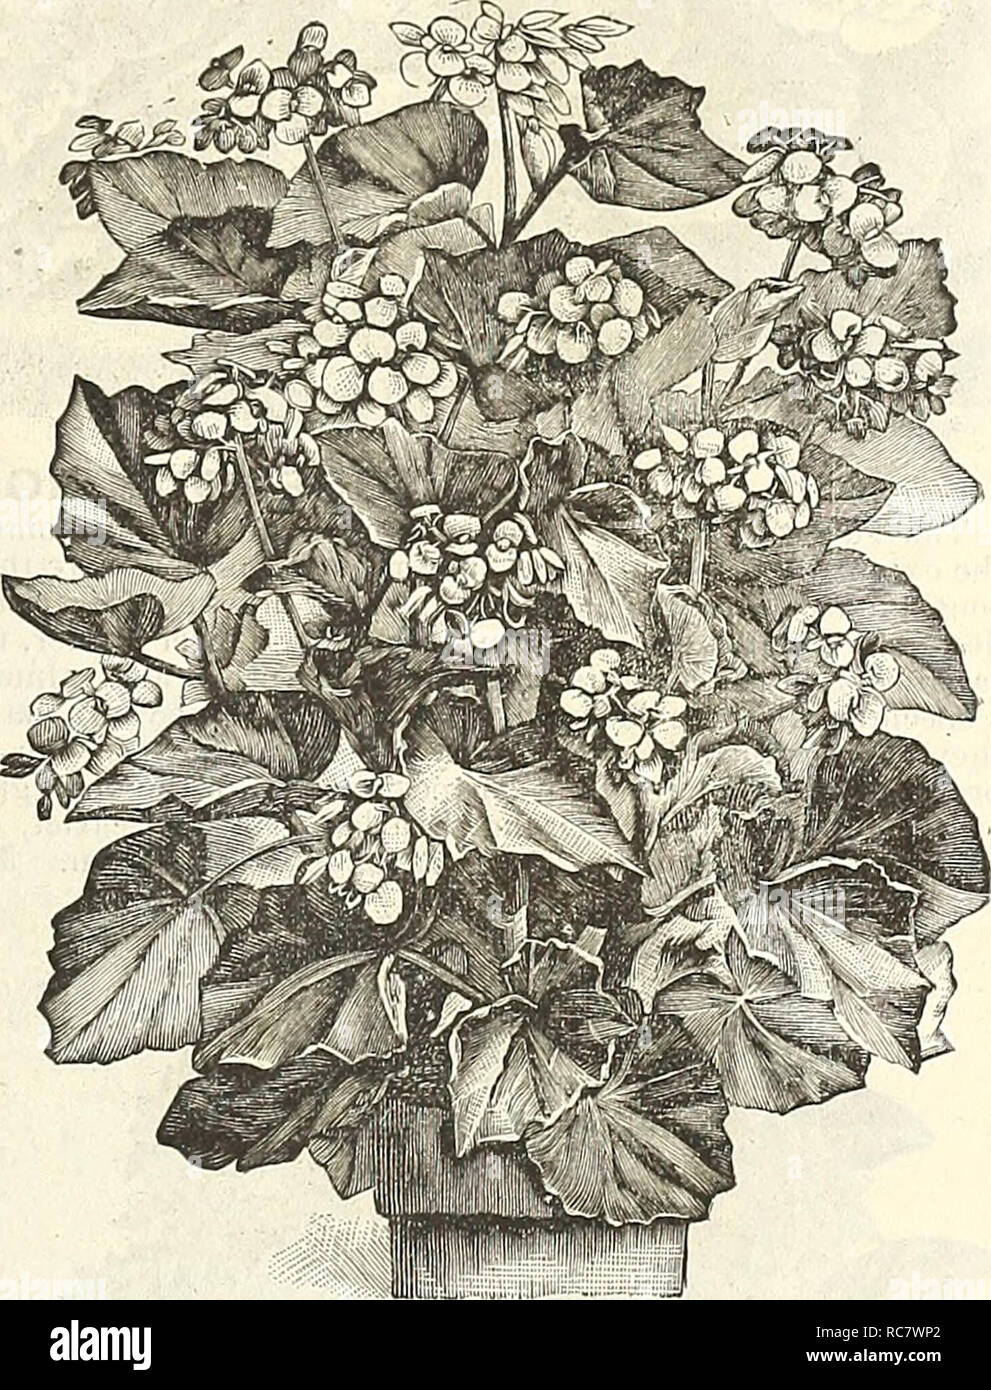 . Dreer's garden calendar for 1888. Seeds Catalogs; Nursery stock Catalogs; Gardening Catalogs; Flowers Seeds Catalogs. Single Abutilons. Thompsoni Plena. Aureuni Maculatuin. Green and yellow mottled foli- age, flowers yellow, veined with crimson. Boule de Neige. Fine, pure white ; free blooming. Brilliant. Bright red, free dwarf habit. Couronne D'or. Beautiful, deep sulphur yellow. Crusader. Rich cinnabar scarlet, large. Emperor. Claret crimson, large and fine. Firefly. Rich salmon scarlet; fine. King of Roses. Large rosy crimson. Royal Scarlet. Brilliant scarlet, very dwarf and free. Scarlet Stock Photo